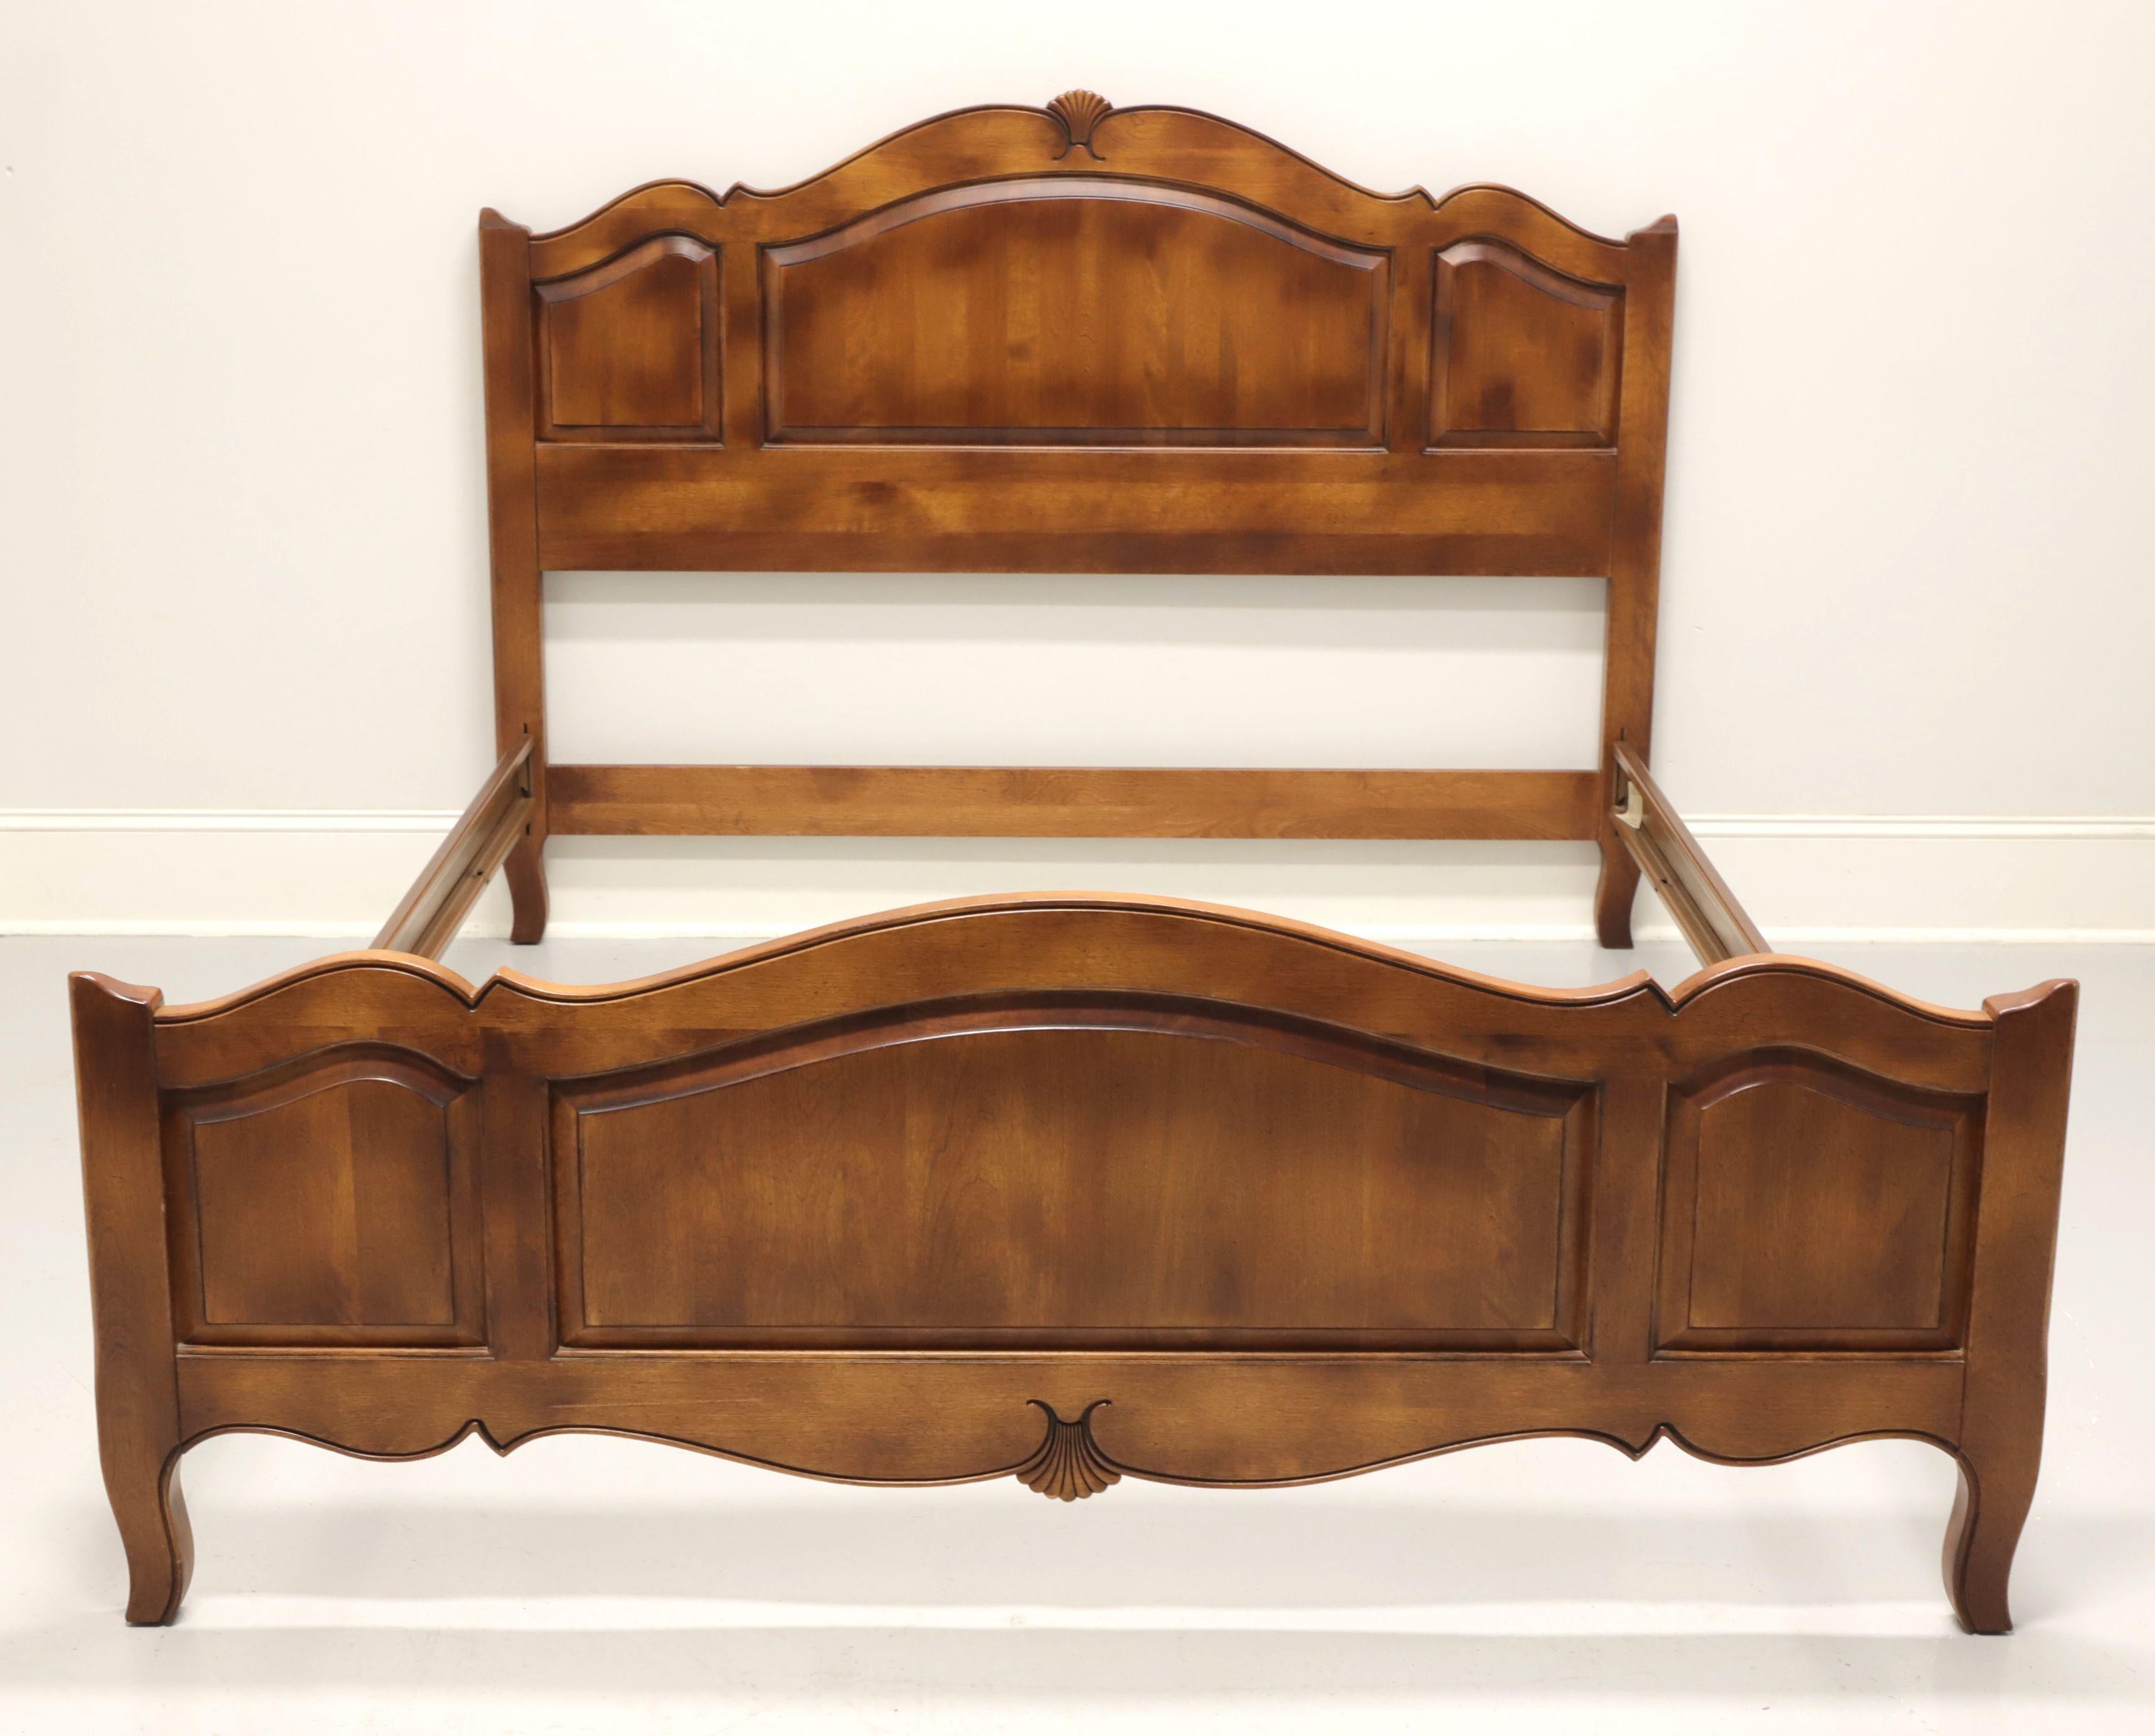 A French Country style queen size bed by Ethan Allen. Solid maple headboard and footboard with clip held wood grain metal side rails. Features a headboard with a curved top, decorative carved fan to top center and three panels. Footboard also has a